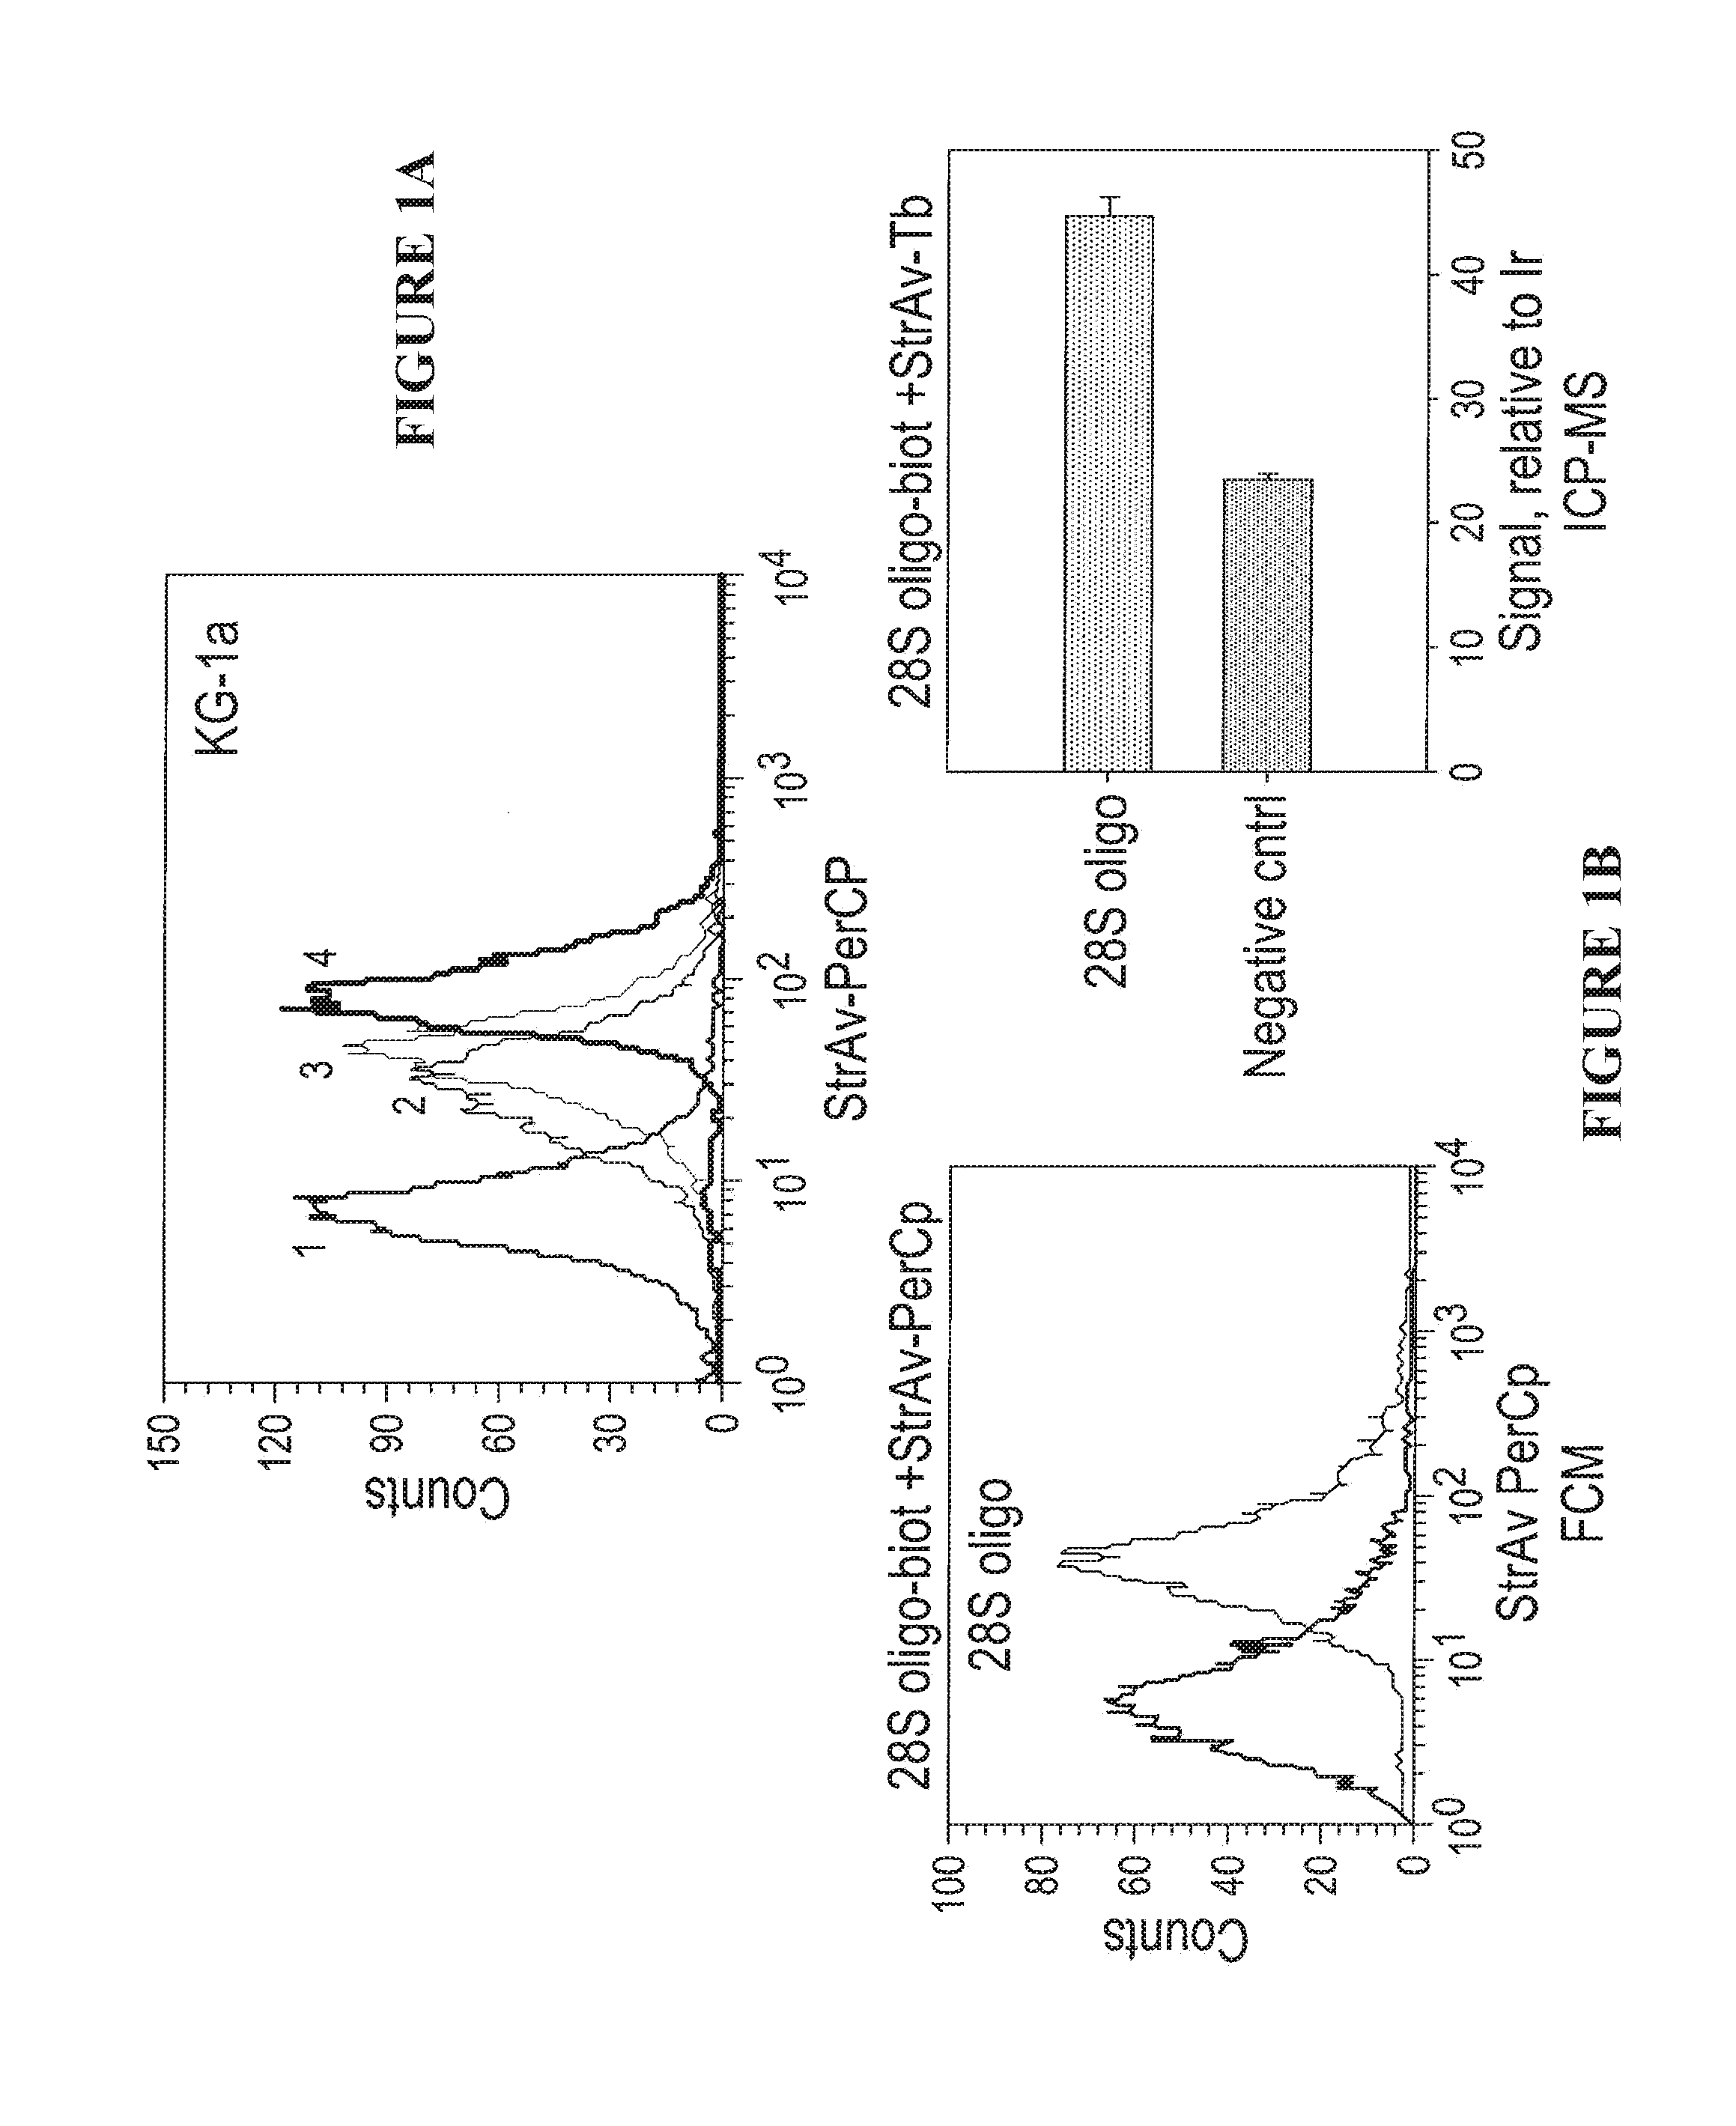 Methods of Using Inductively Coupled Plasma Mass Spectroscopy Systems for Analyzing a Cellular Sample